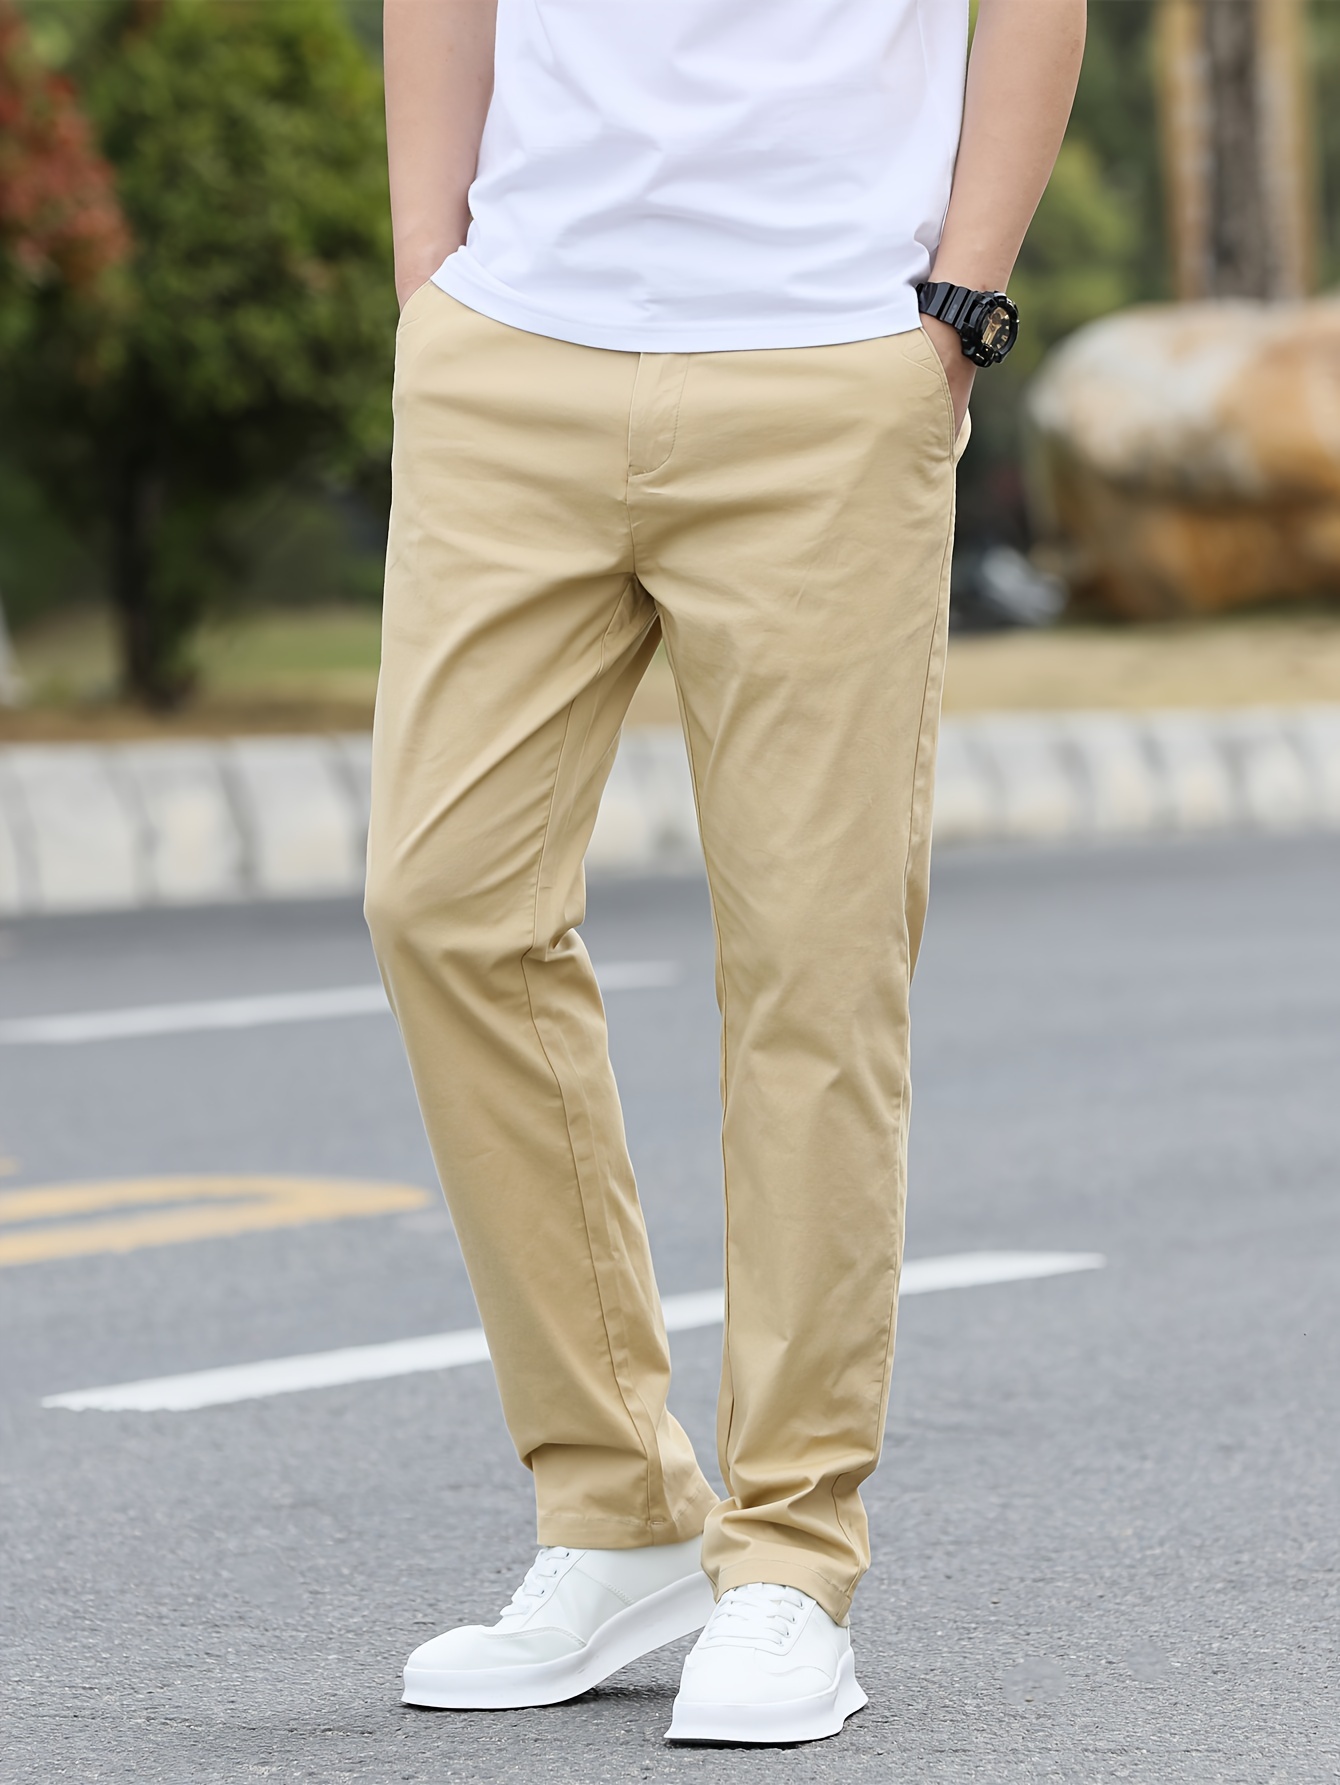 mens solid pants with pockets casual cotton trousers for outdoor activities gift